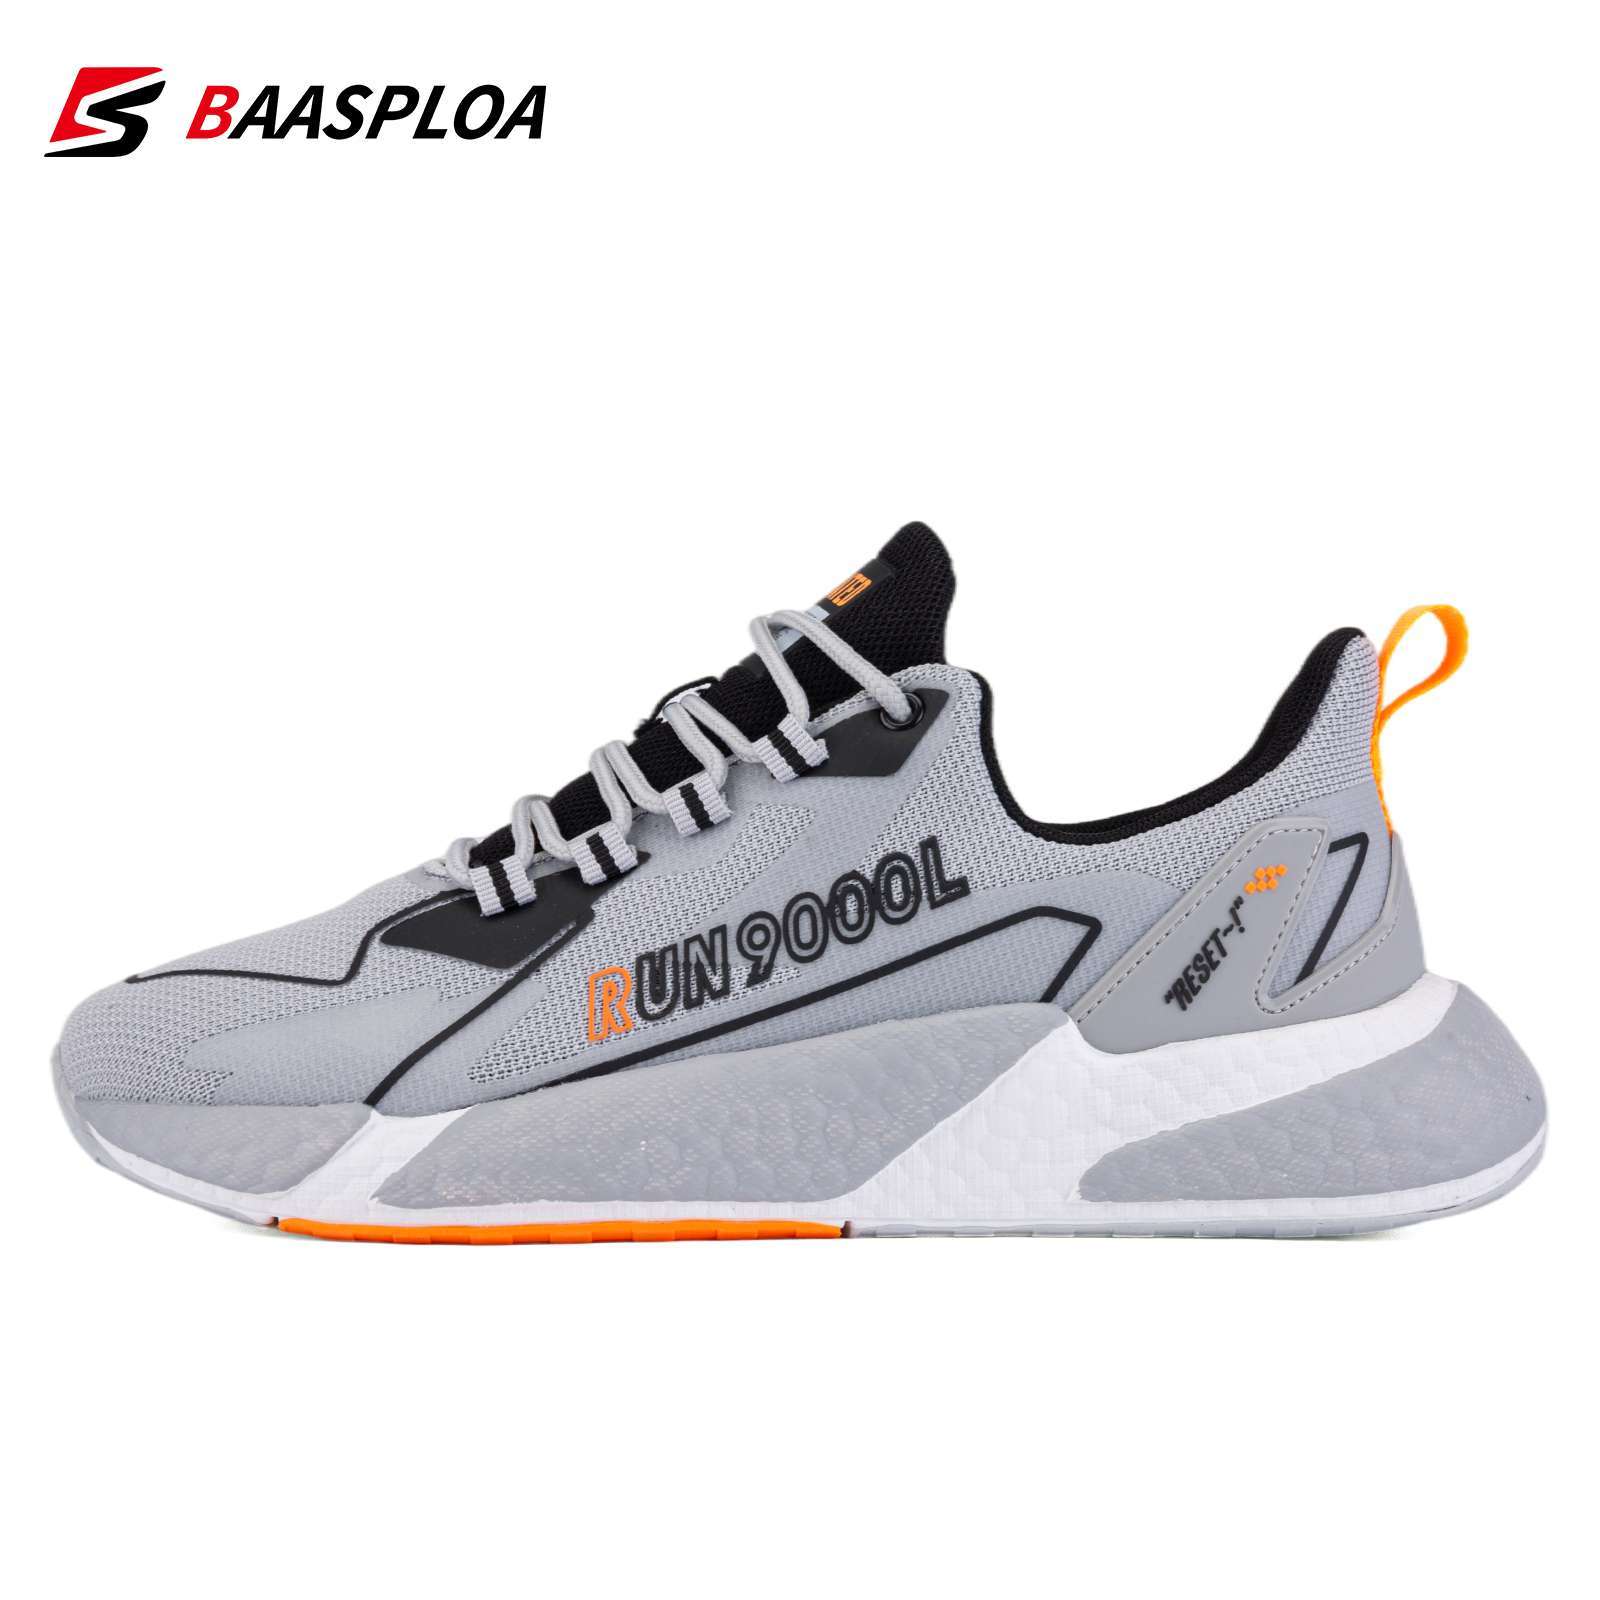 Baasploa Spring Men Sneaker Shoe Fashion Casual Shoes Mesh Sneakers Breathable Male Walking Shoes Lace Up 5